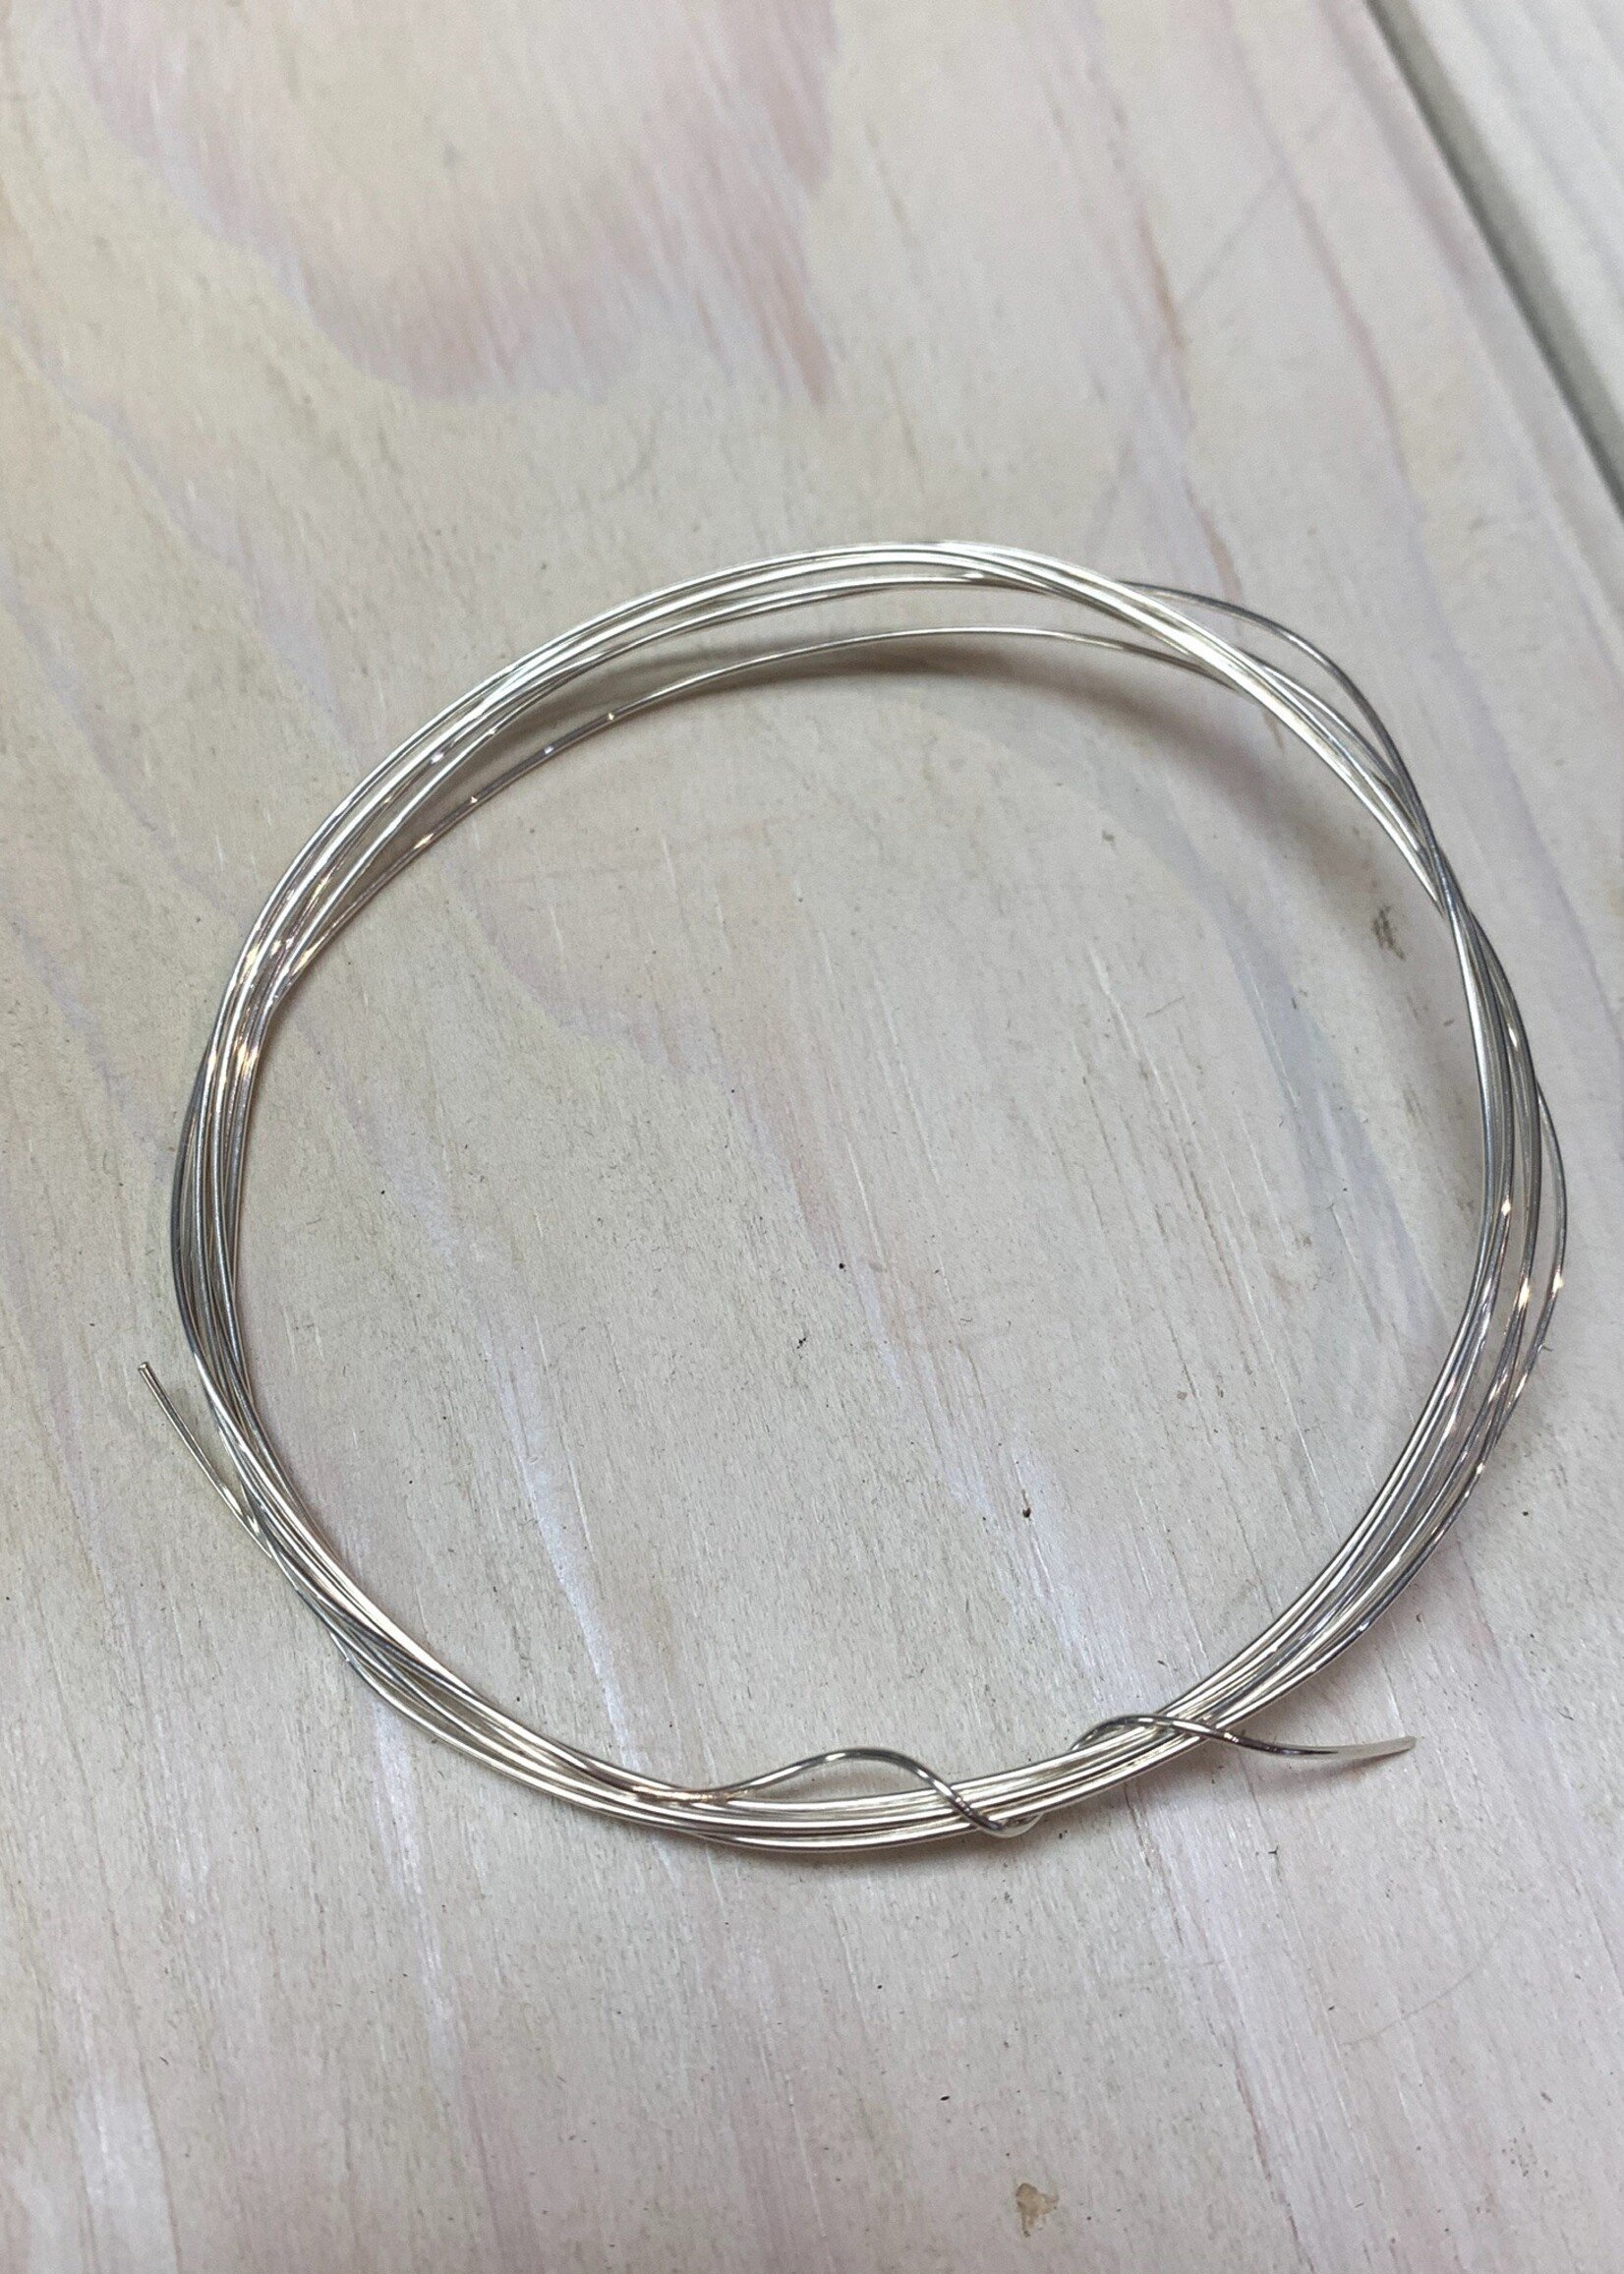 22ga Round Wire Sterling Silver 5ft